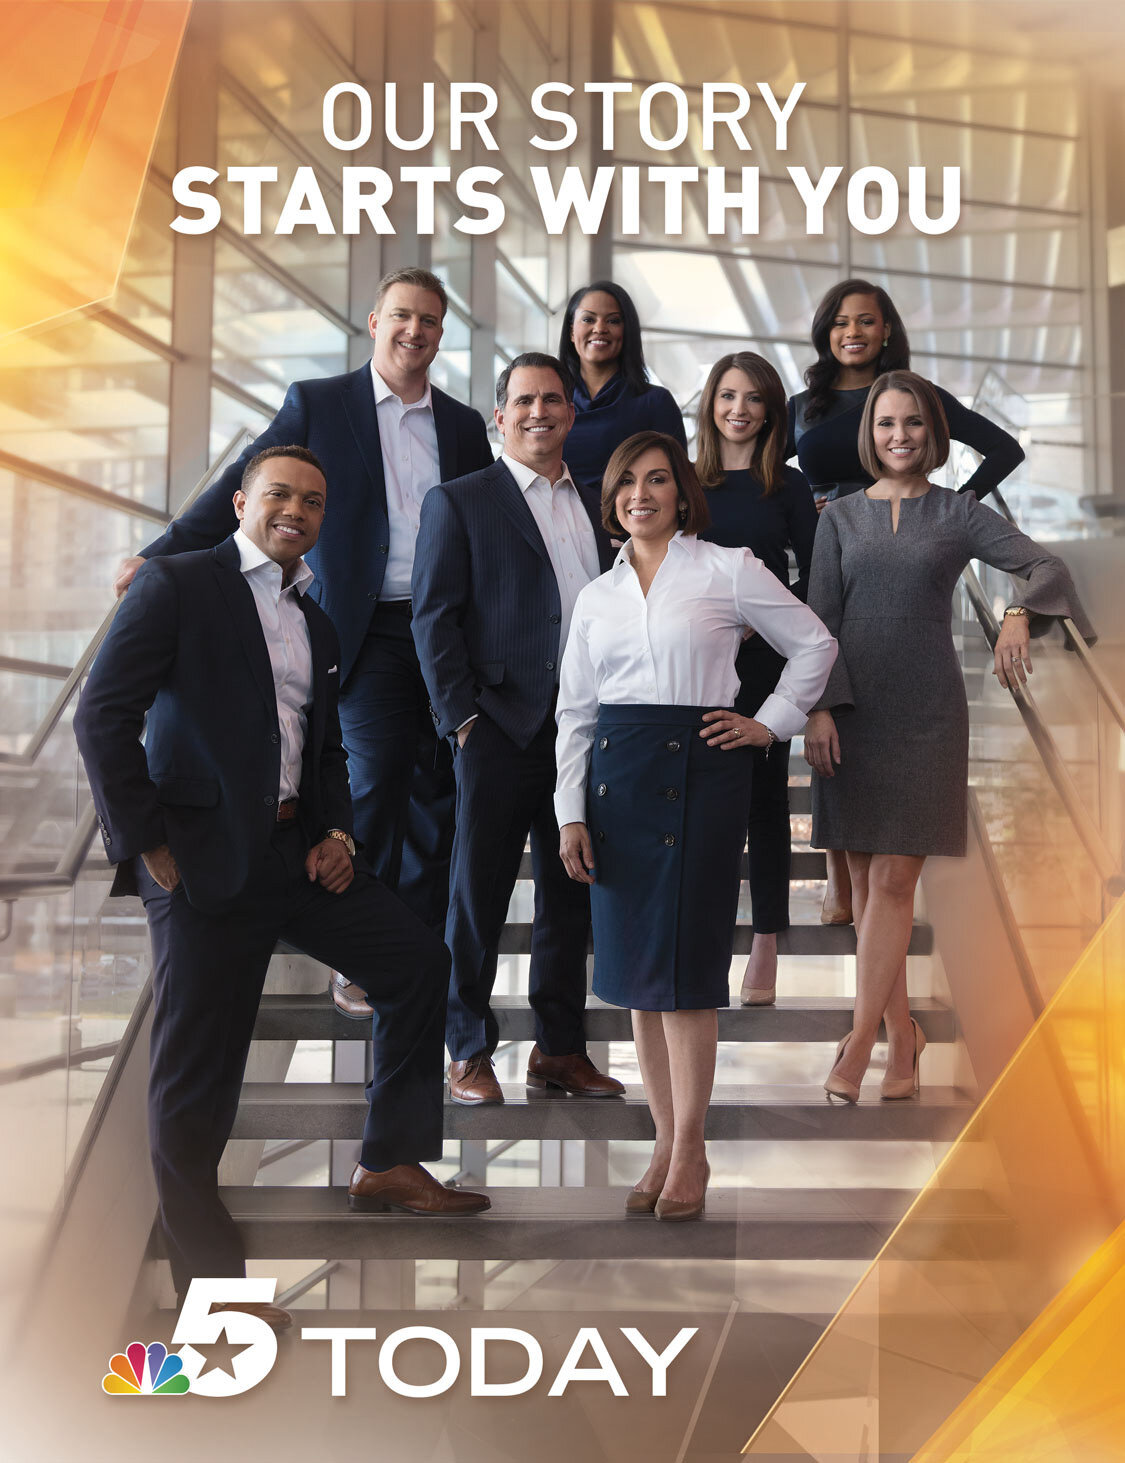 NBC 5 Today "Our Story" Ad